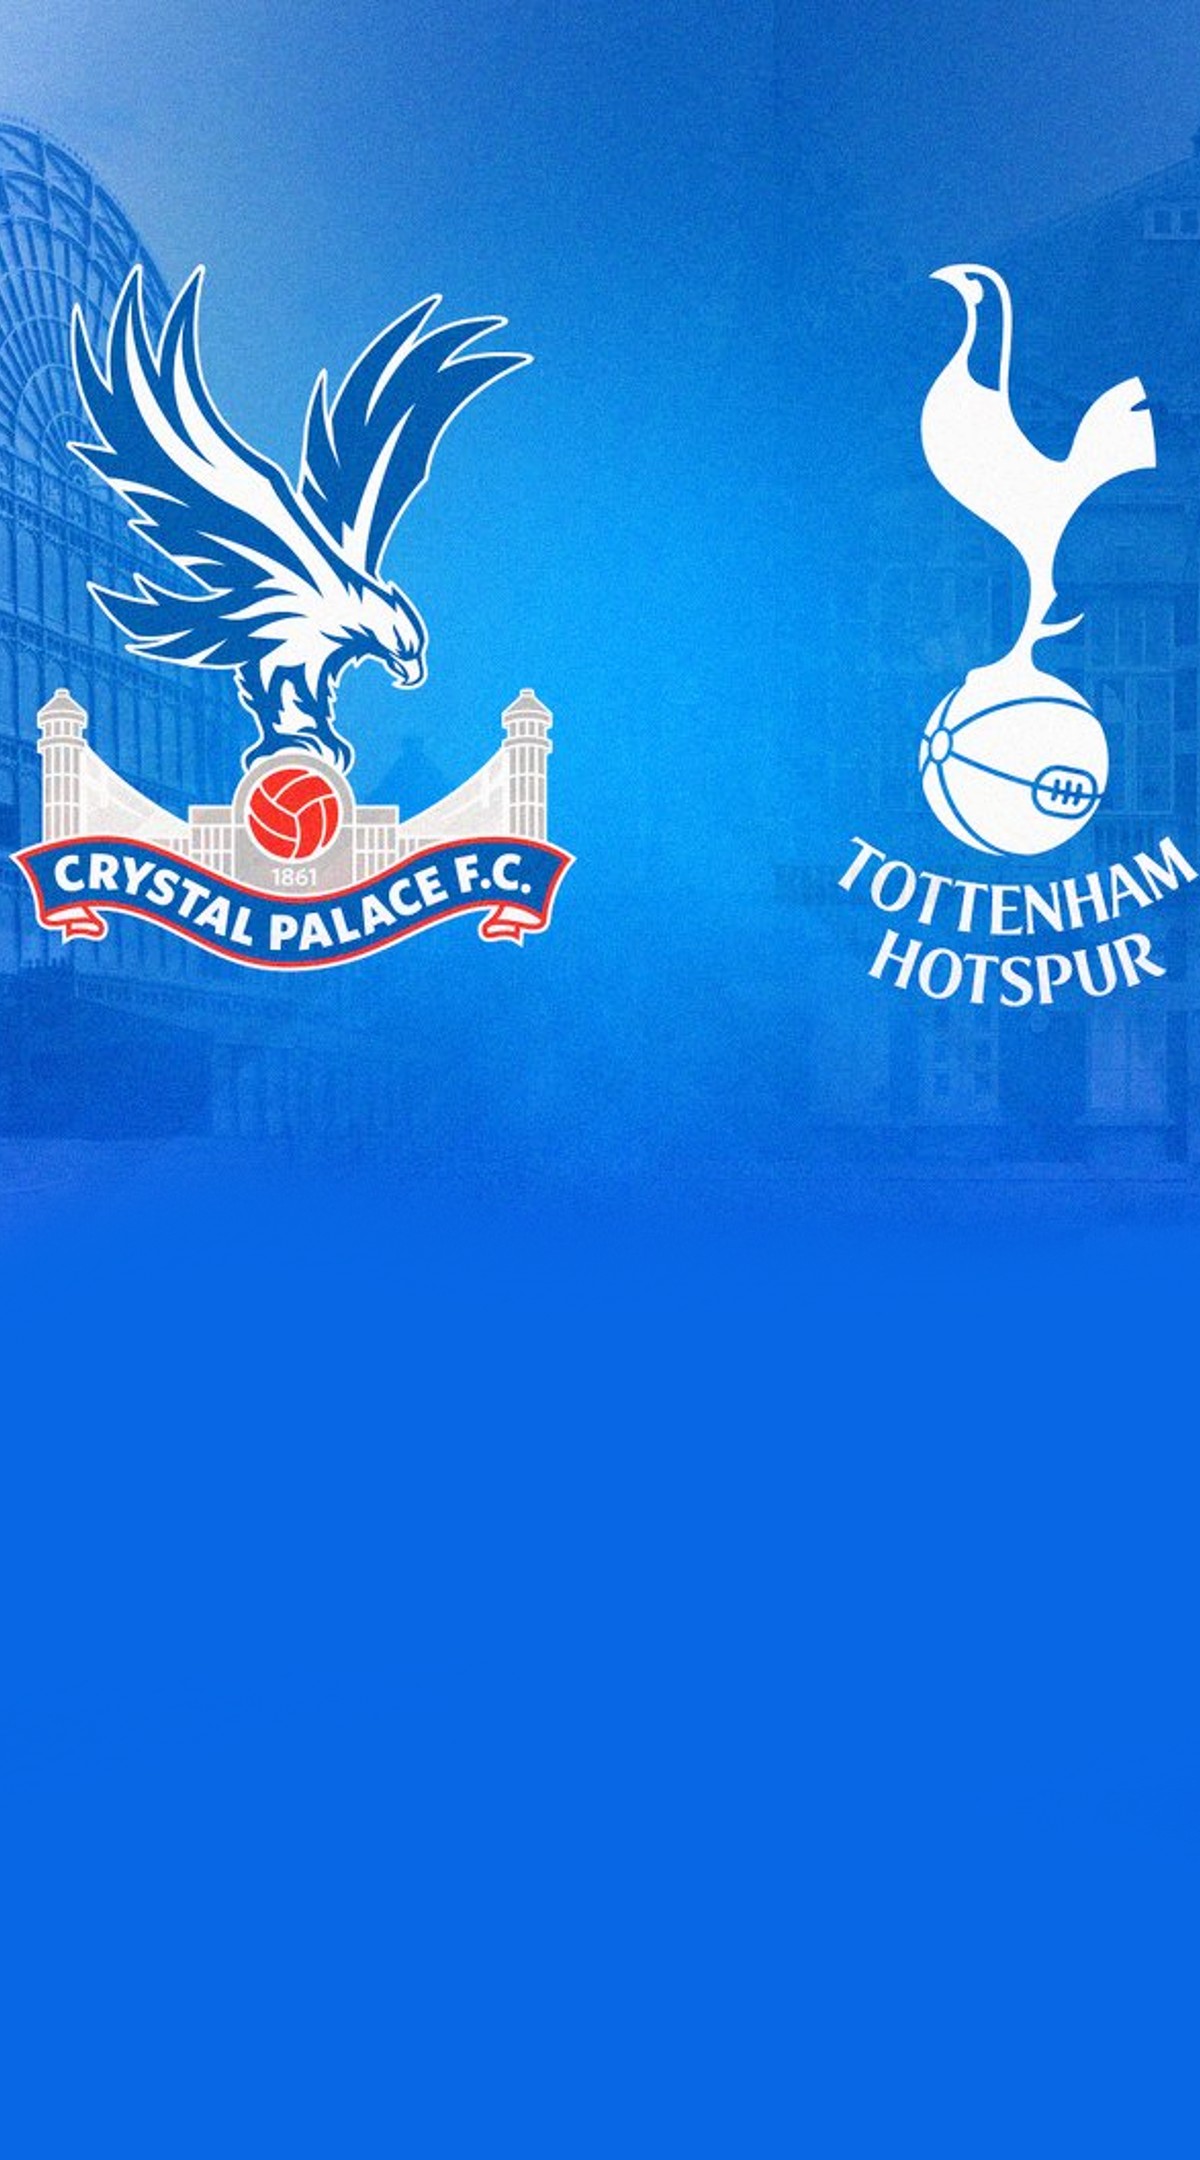 London Derby Alert: Tottenham Hotspur to Face Crystal Palace in EPL Showdown - 2 Expected Tactics from Crystal Palace